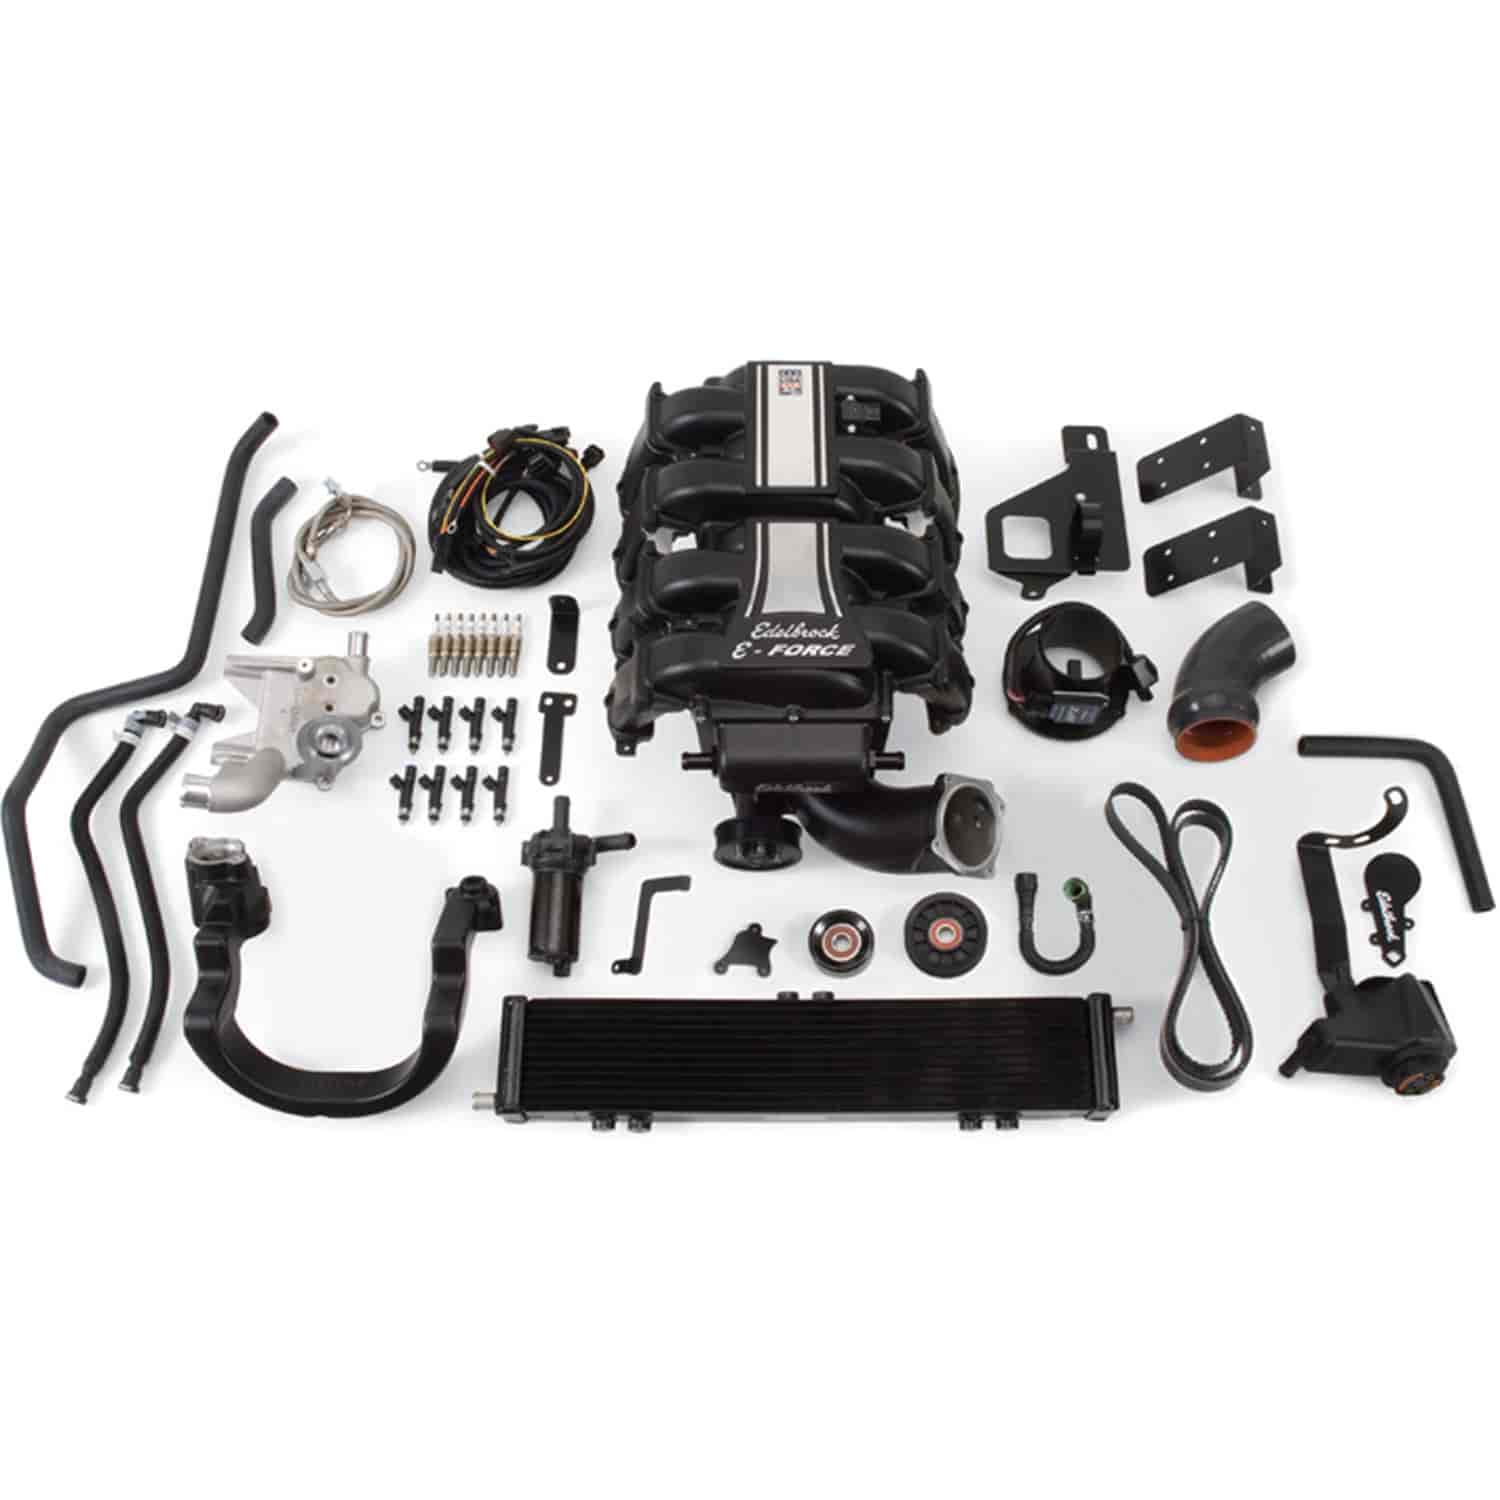 E-Force Supercharger Kit for 2009-2010 Ford F-150 2WD